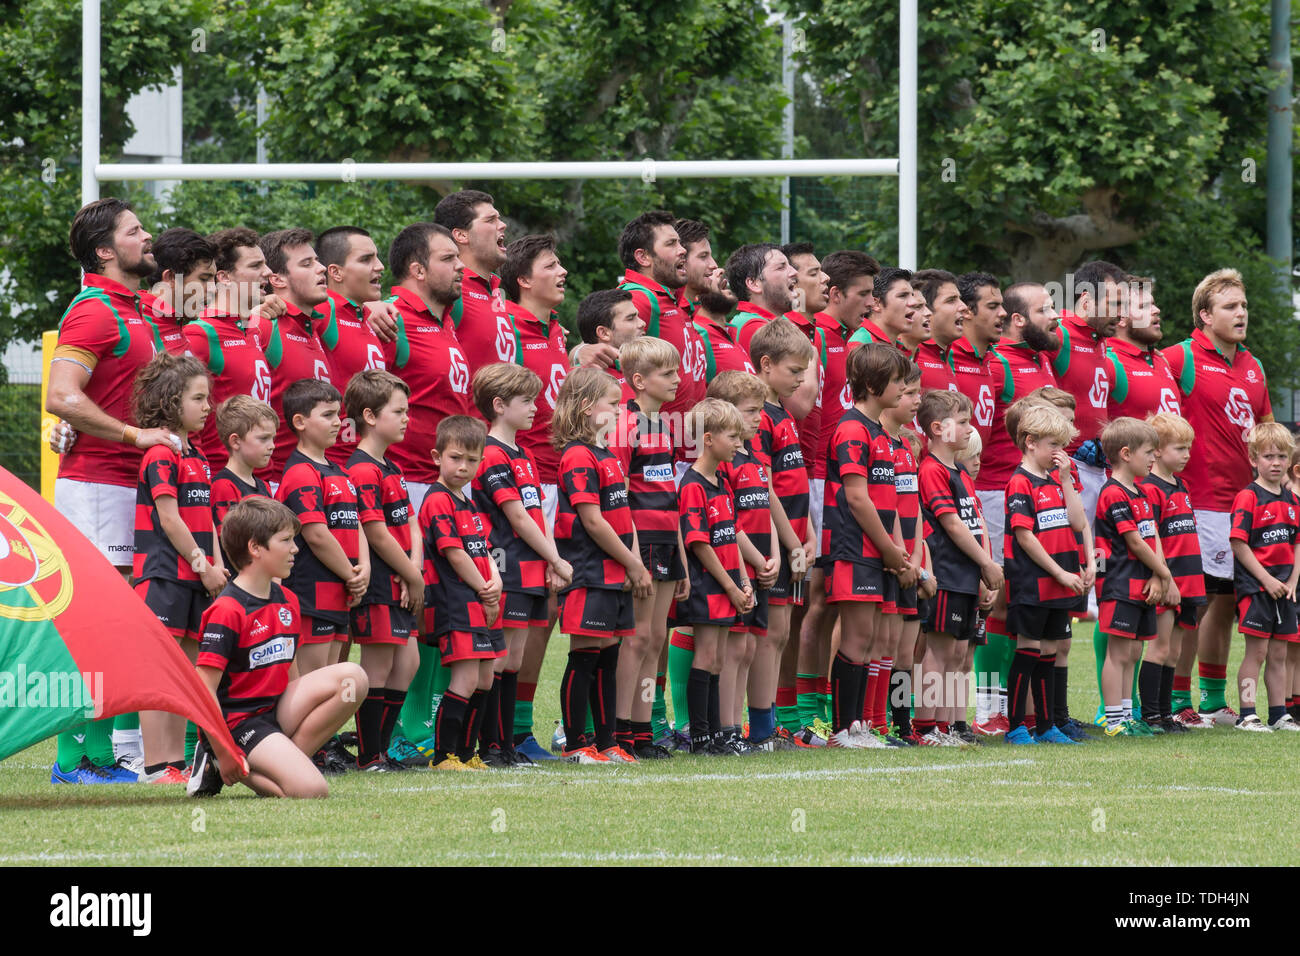 Hessen, Germany. 15th June, 2019. Rugby: EM, Relegation, Germany - Portugal. The national team of Portugal during the national anthem. Credit: dpa picture alliance/Alamy Live News Stock Photo